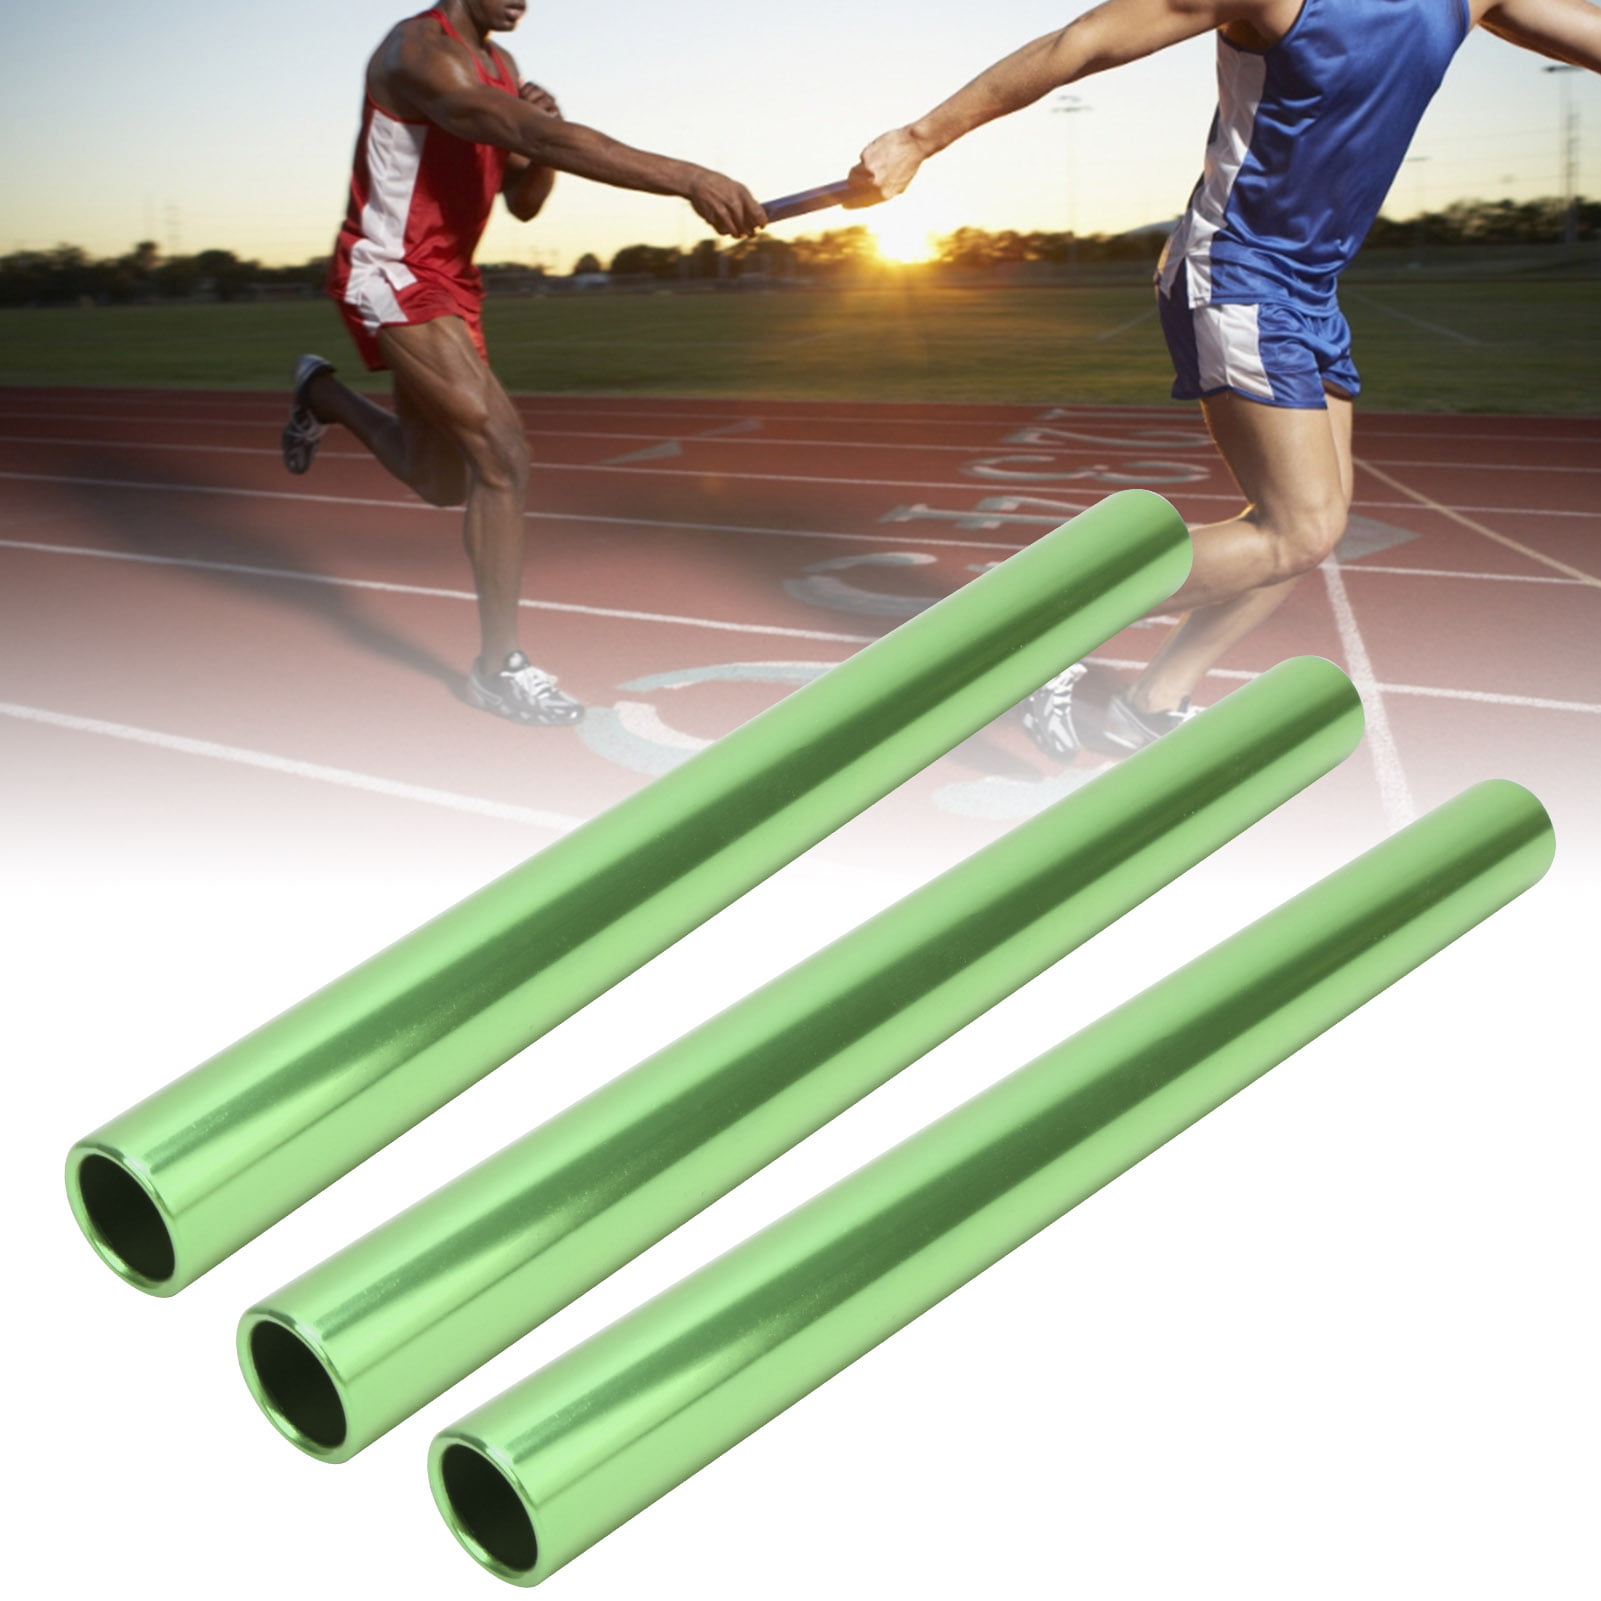 Dilwe Relay Baton Aluminum Baton Track with a Non-Slip Ground Finish for Training Competition Tool 